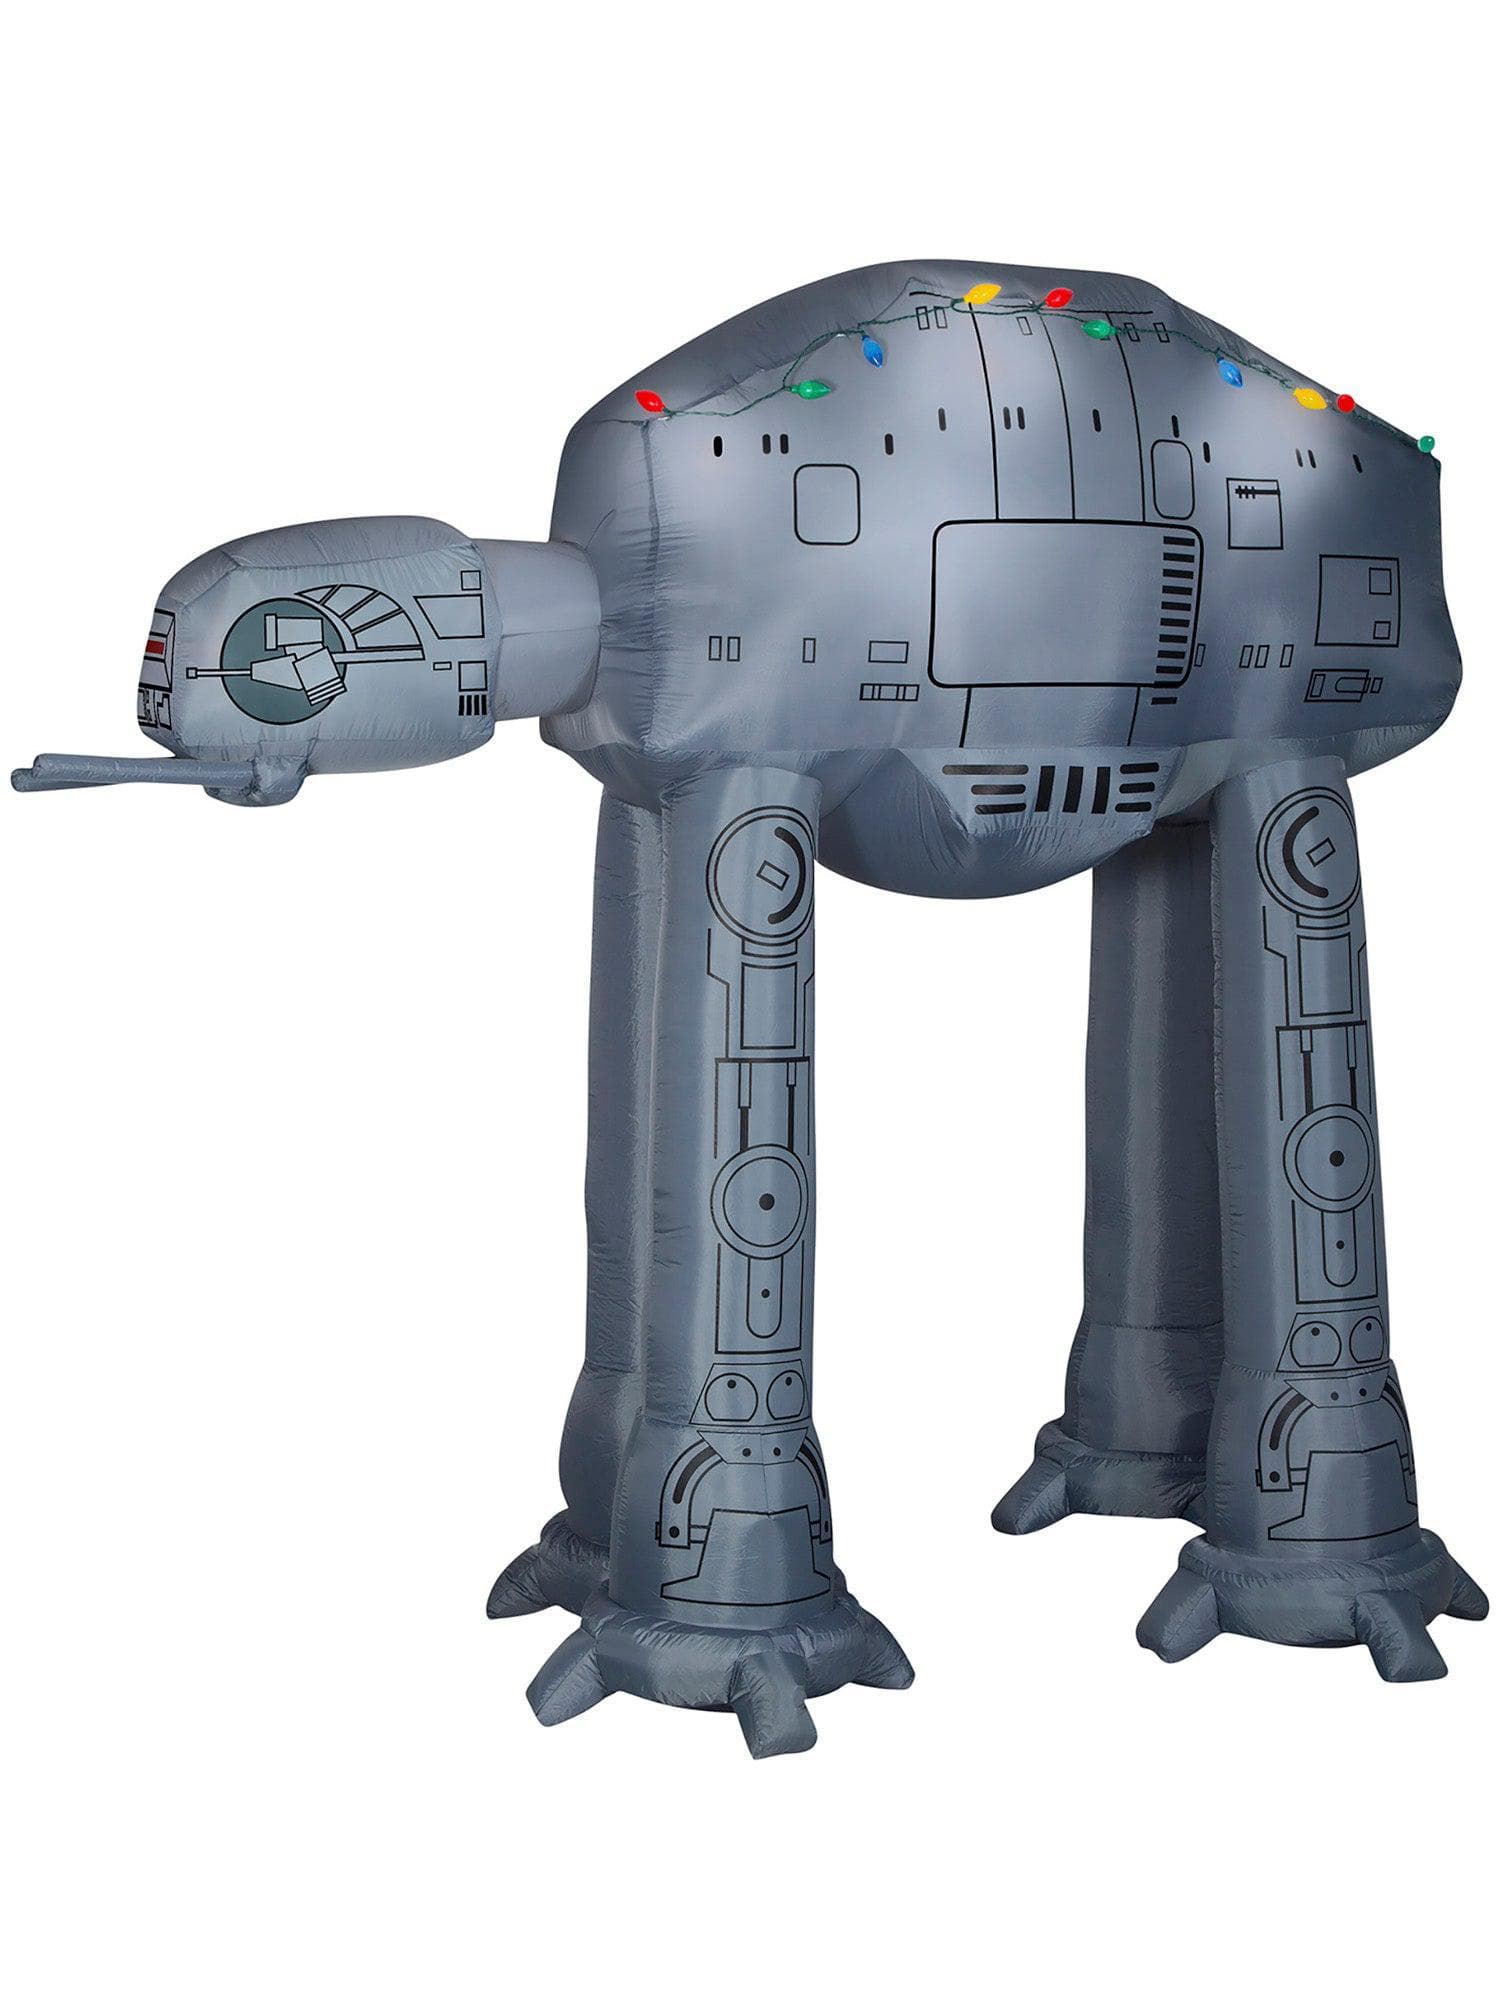 8 Foot Star Wars AT-AT Walker Light Up Christmas Inflatable Lawn Decor - costumes.com